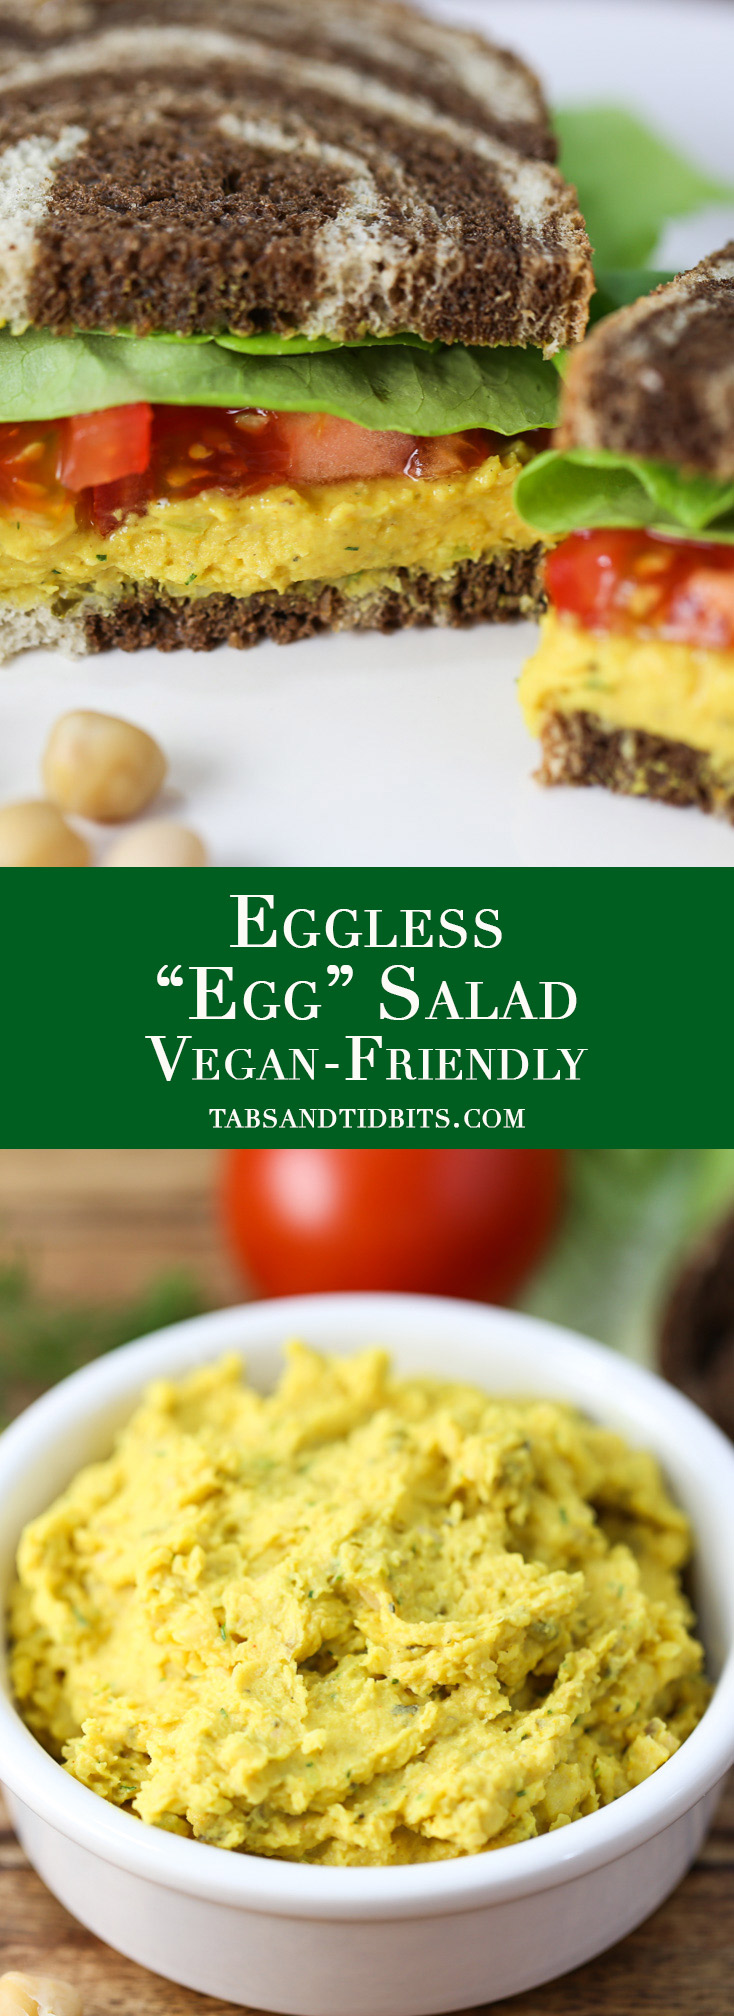 Eggless Egg Salad - A tofu-free vegan egg salad that delivers on flavor and texture!